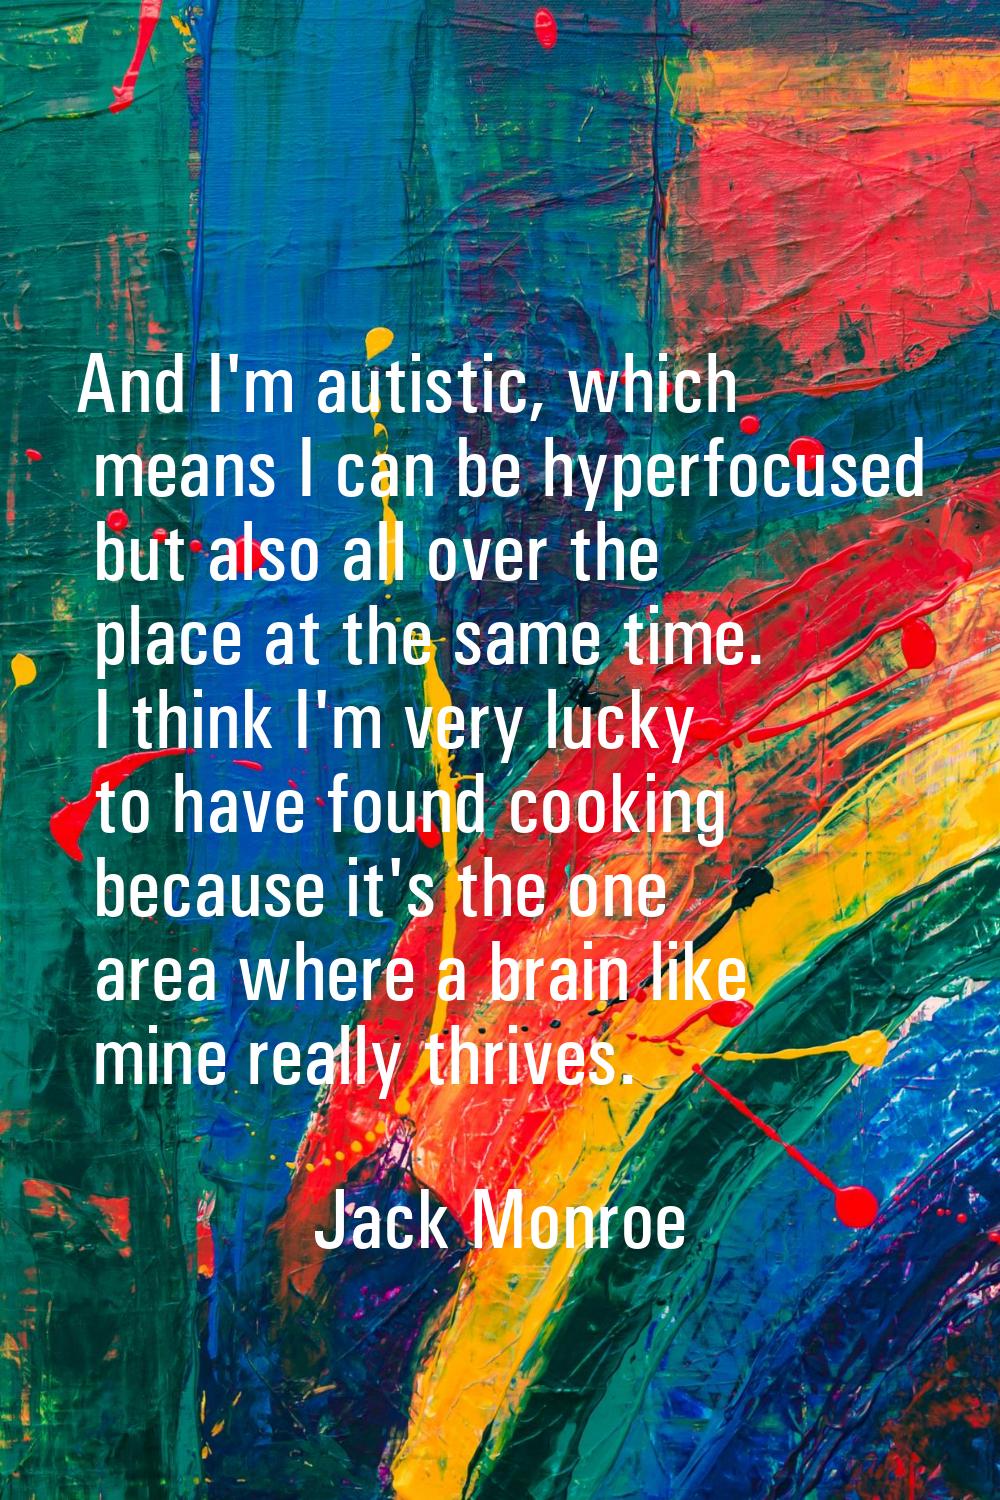 And I'm autistic, which means I can be hyperfocused but also all over the place at the same time. I